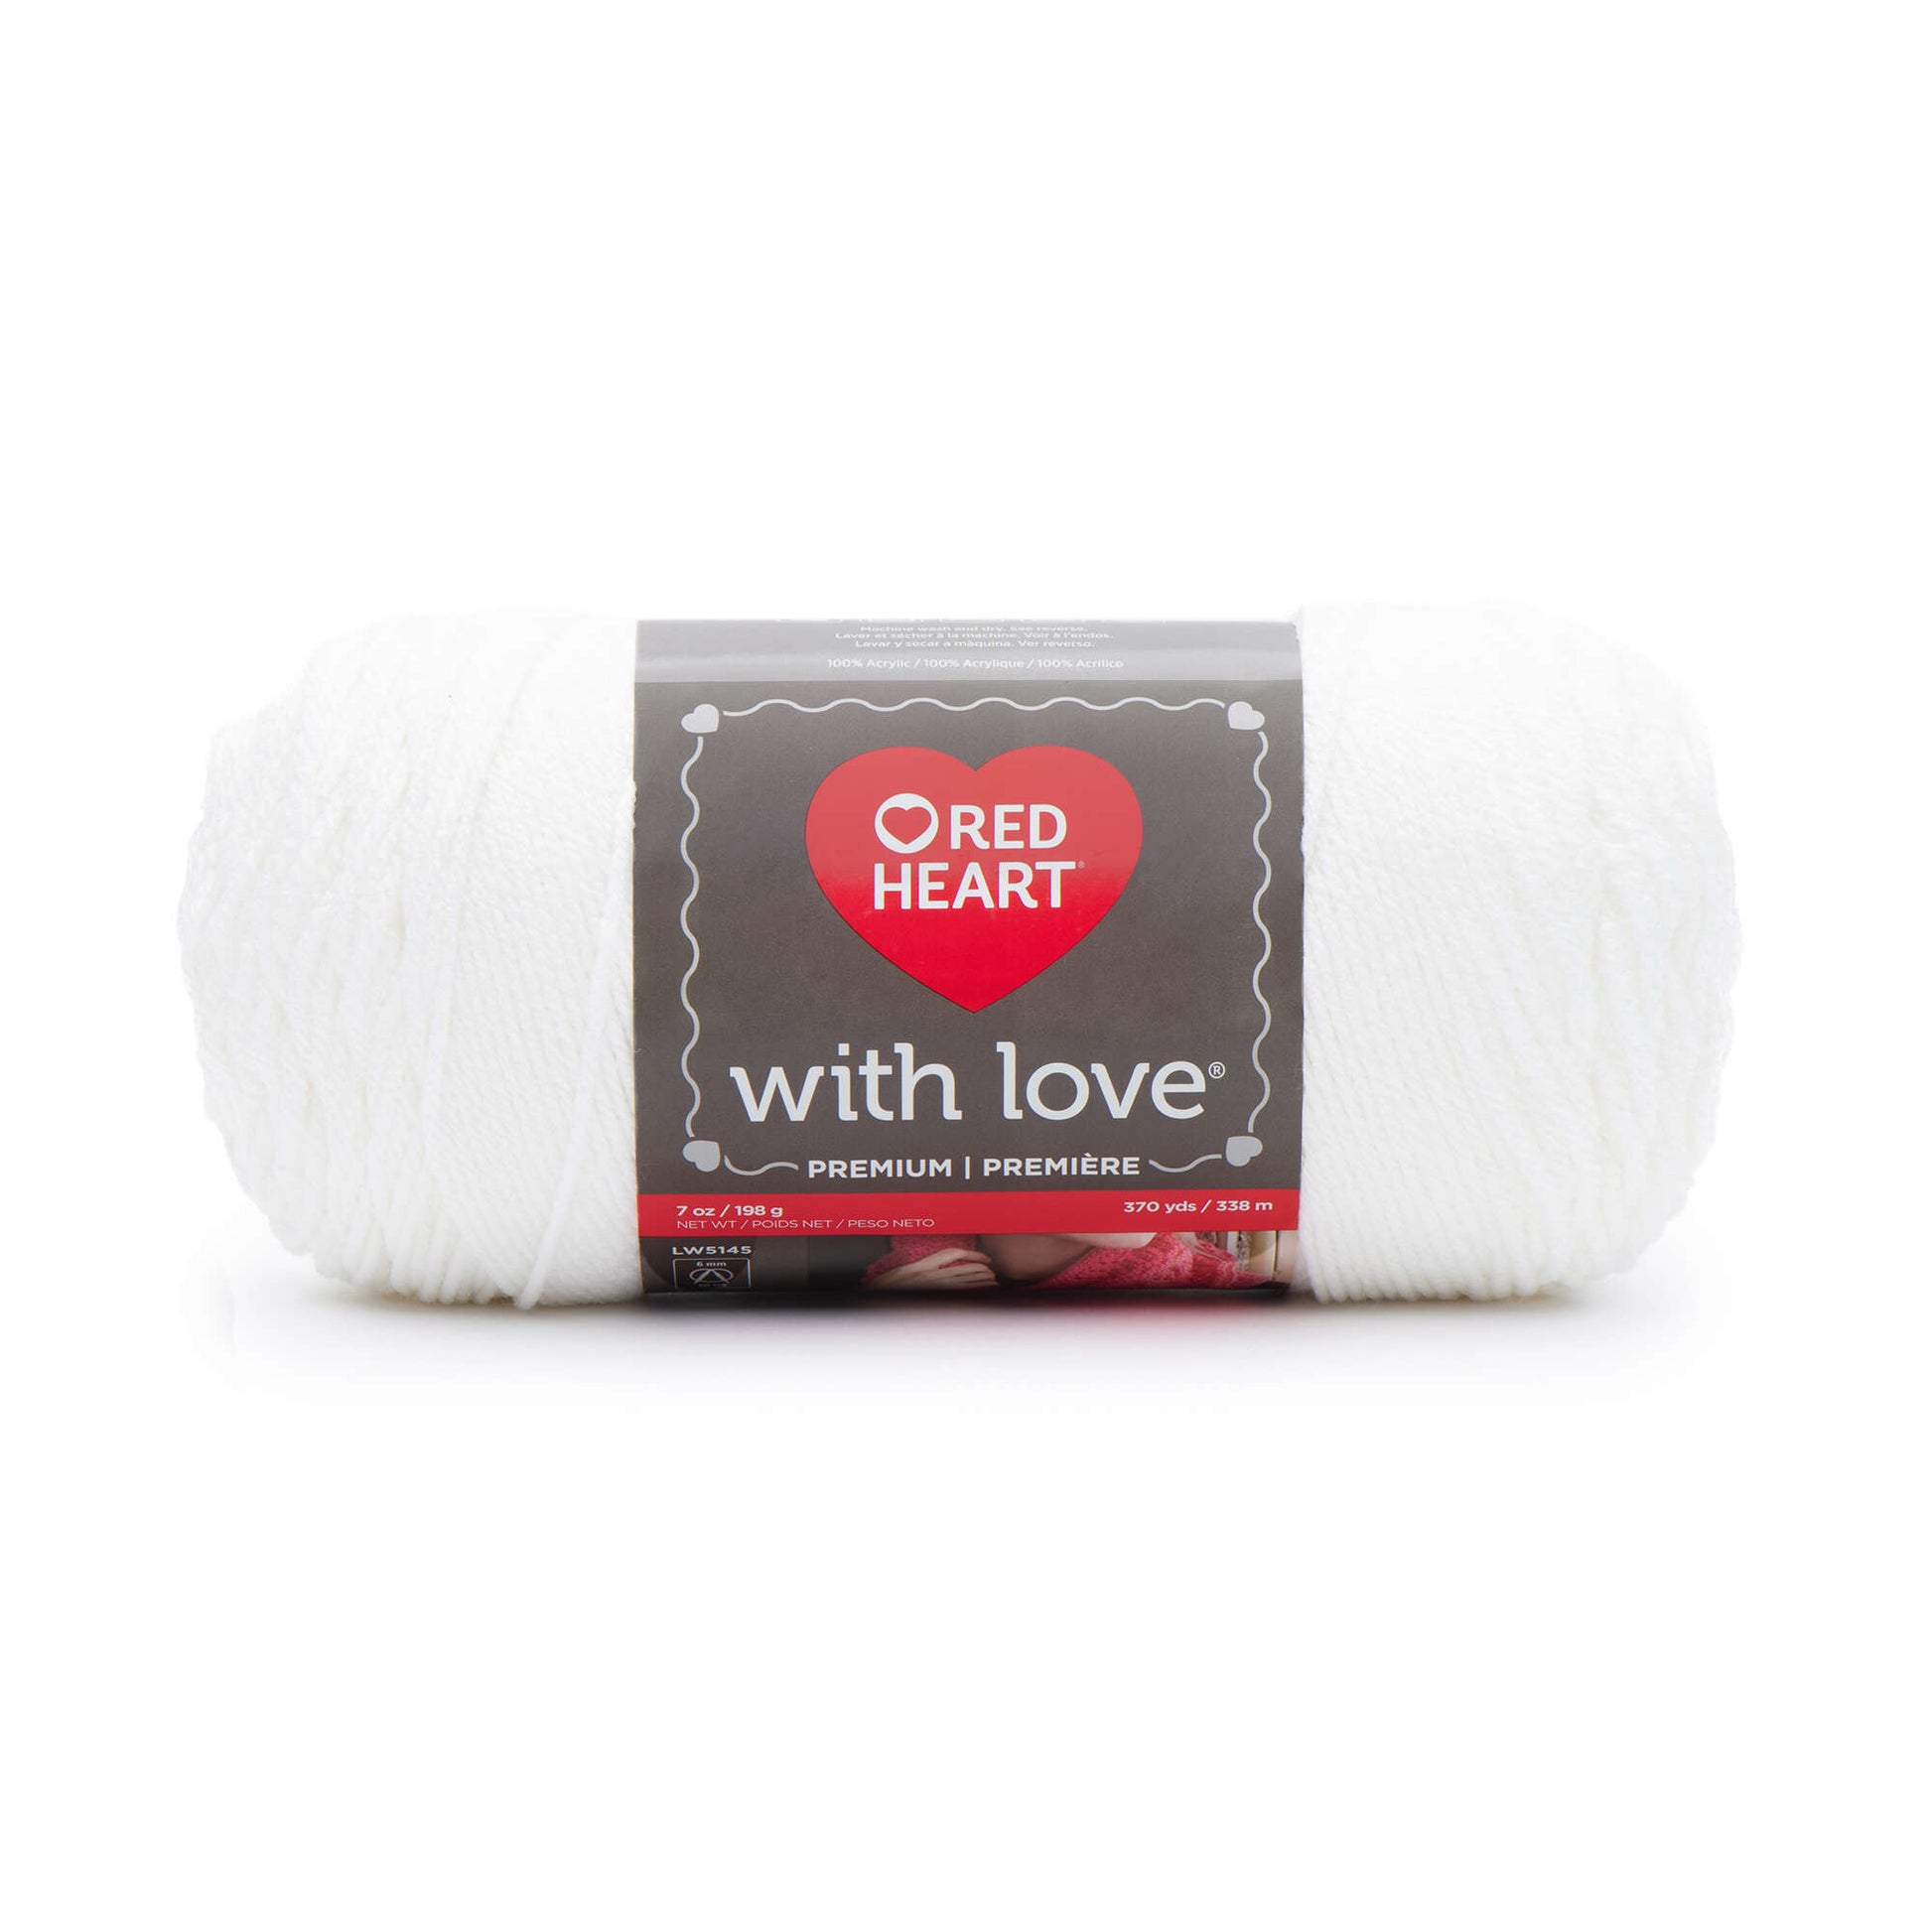 Red Heart with Love Tan Yarn - 3 Pack of 198g/7oz - Acrylic - 4 Medium (Worsted) - 370 Yards - Knitting/Crochet